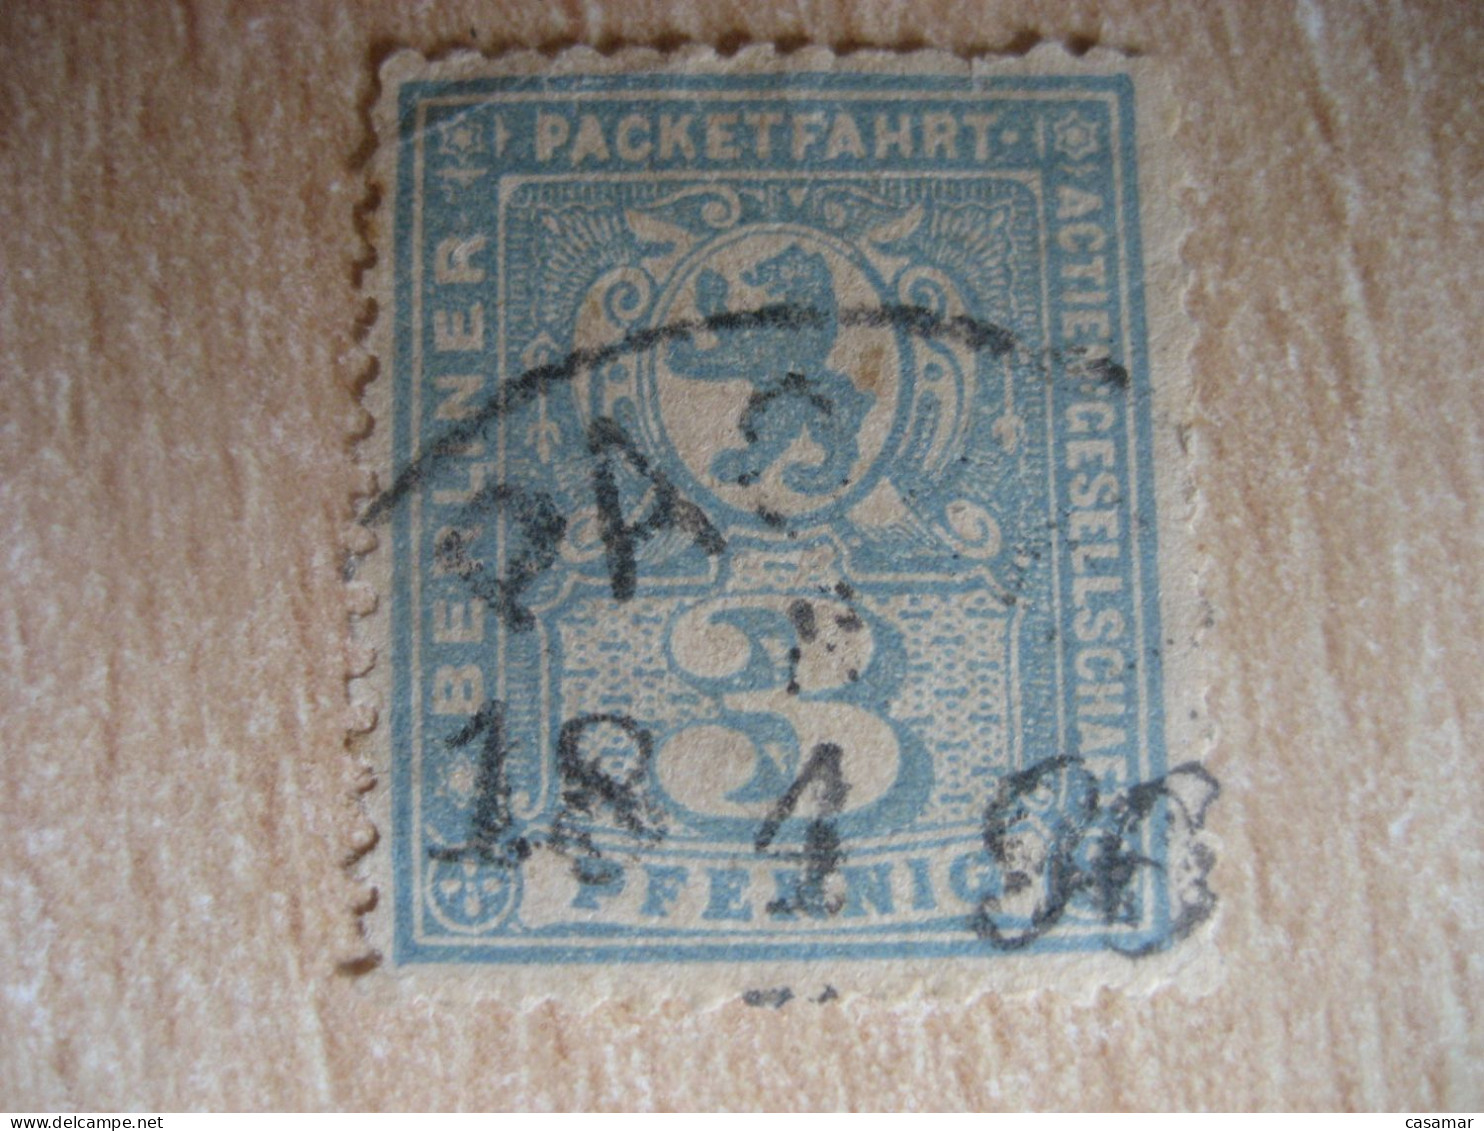 BERLIN Packetfahrt Berliner Actien 3 Pf Privat Private Local Stamp GERMANY Slight Faults - Postes Privées & Locales